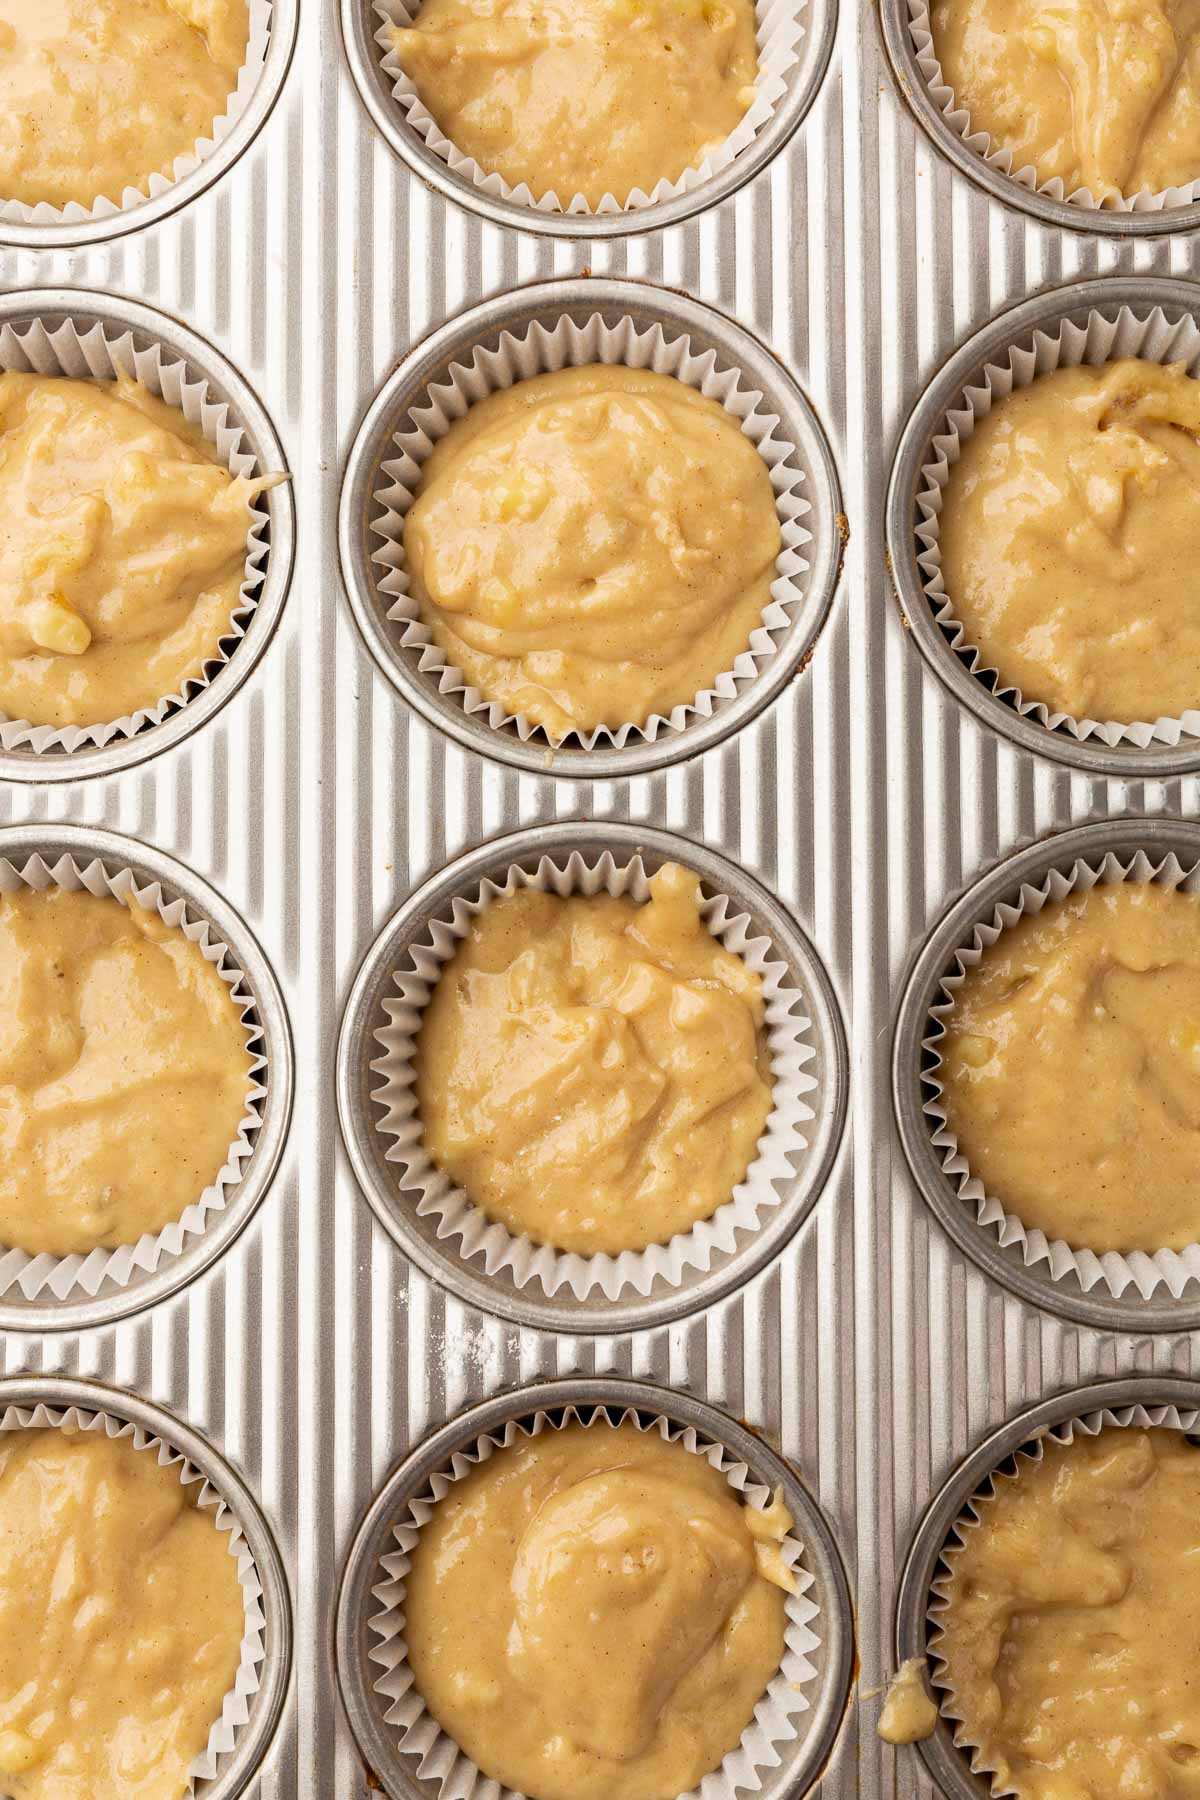 A close of up twelve muffin cups filled with gluten-free banana muffin batter before baking in the oven.